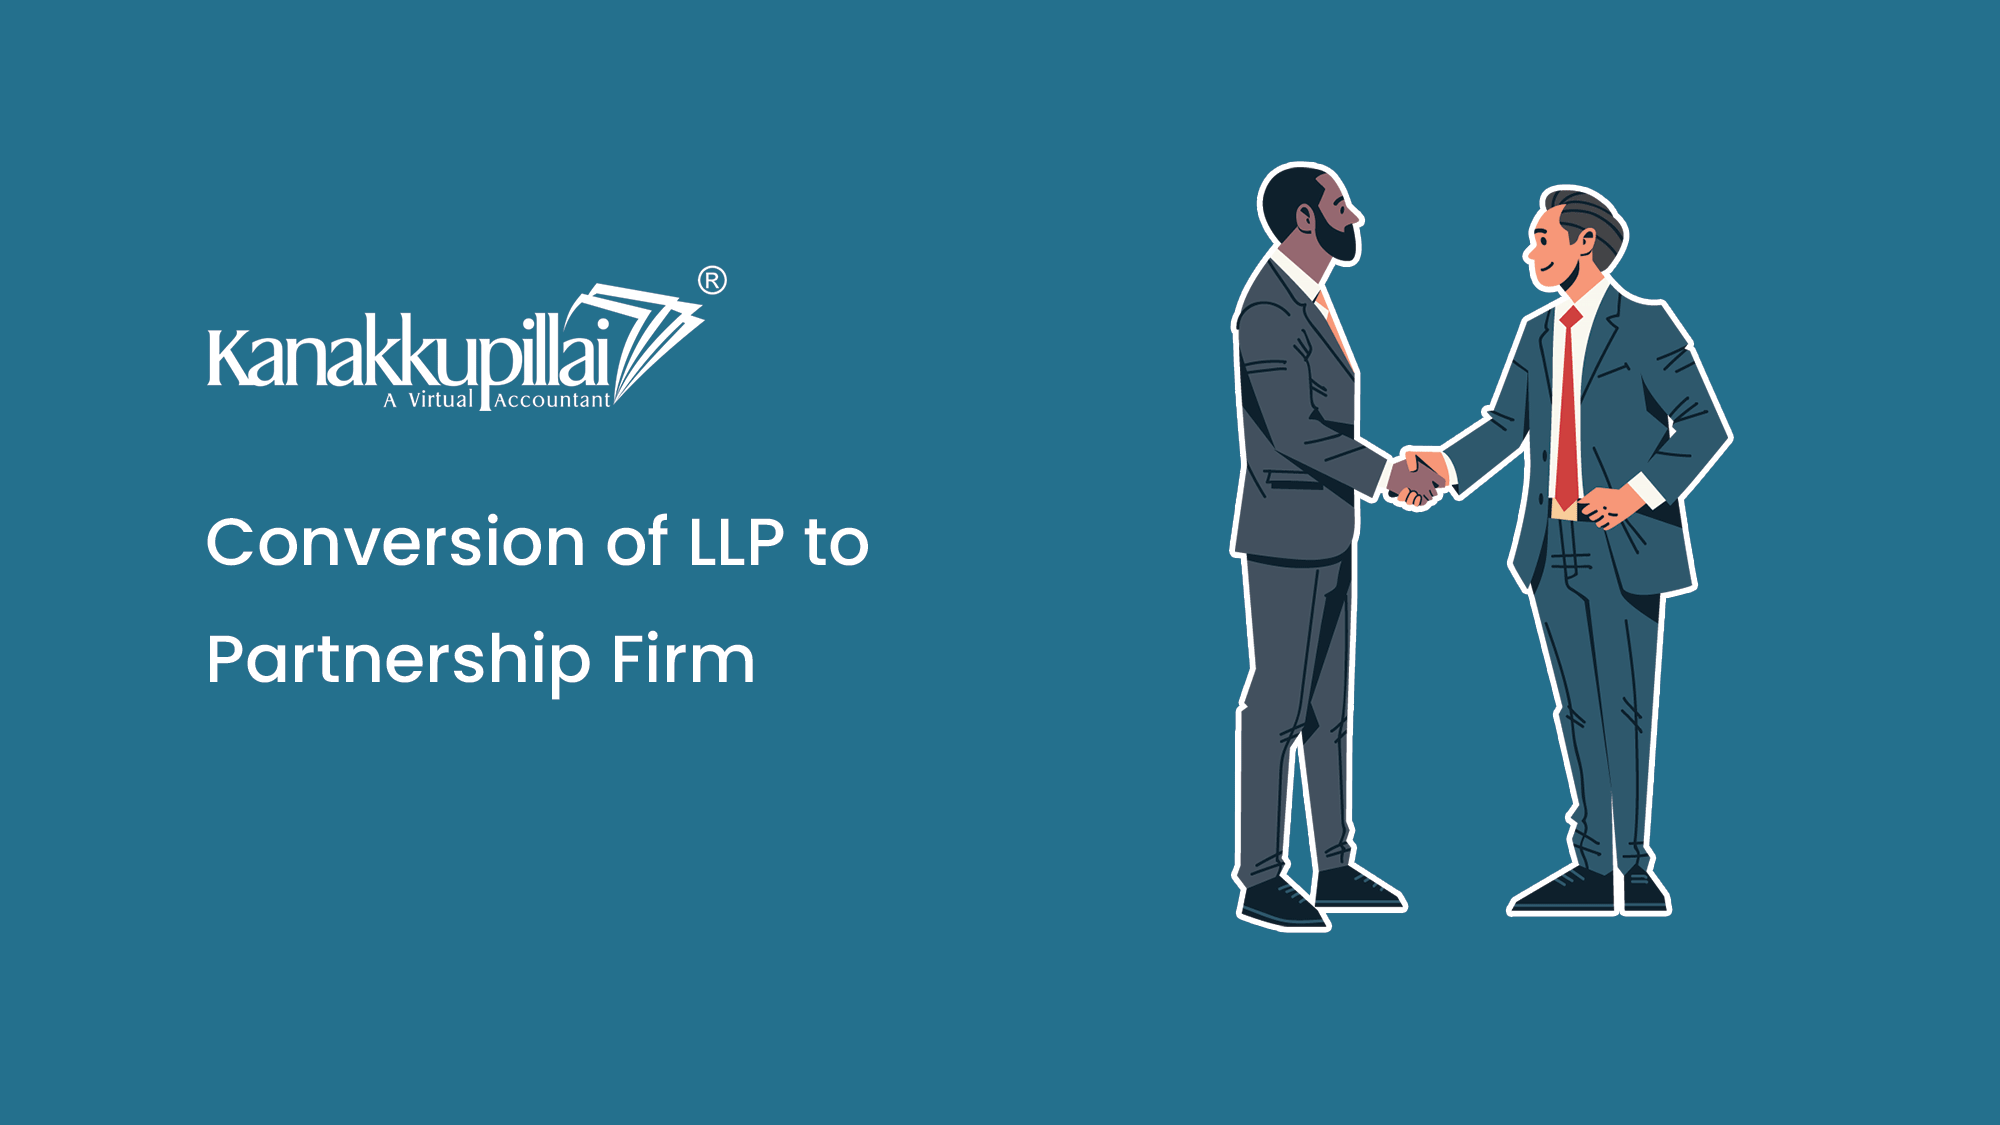 Conversion of LLP to Partnership Firm